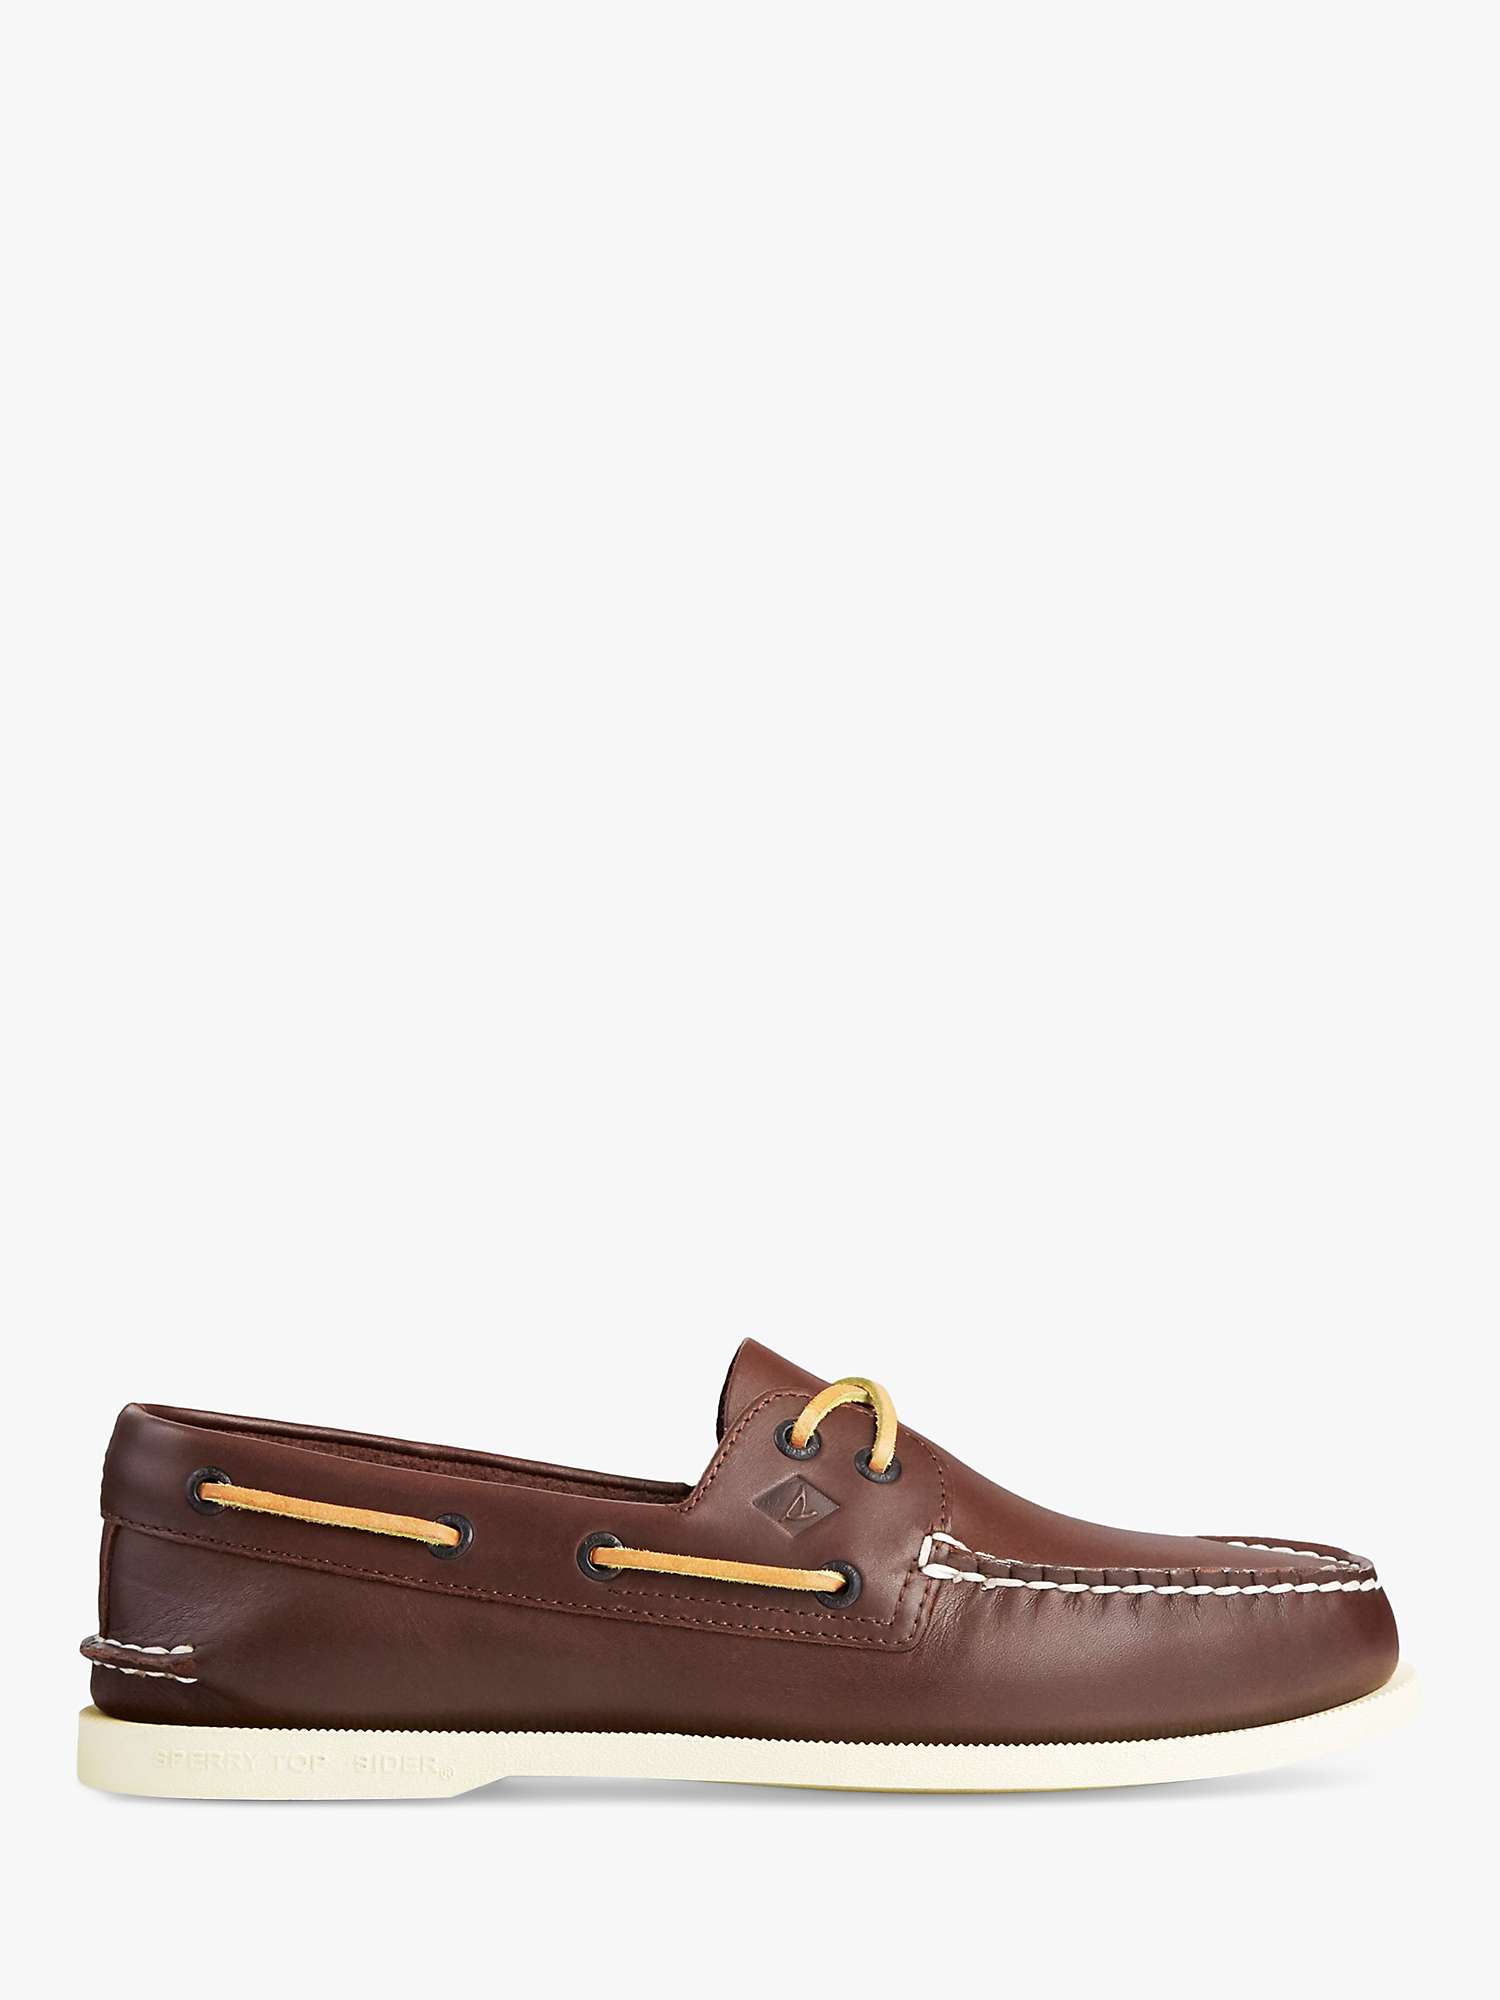 Buy Sperry Authentic Original Leather Boat Shoes Online at johnlewis.com